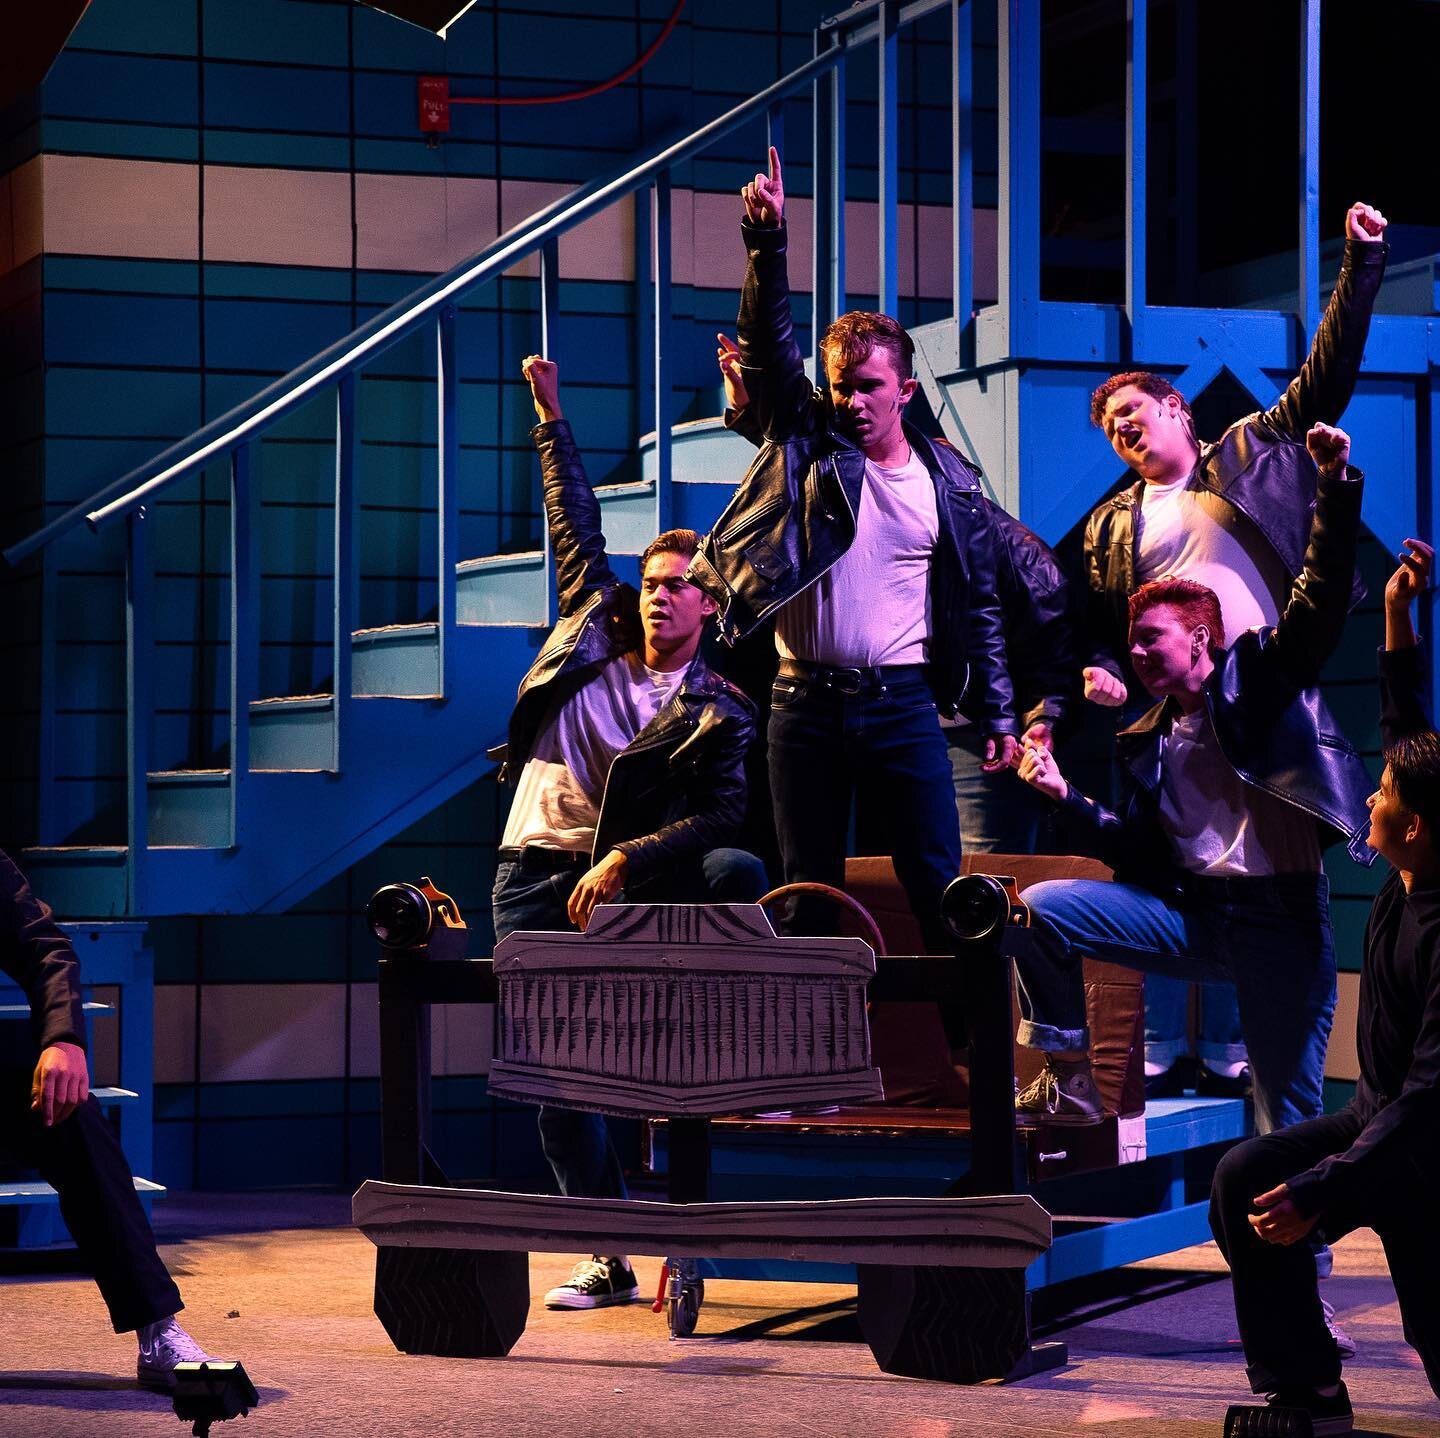 Continuing on from the previous post, &ldquo;Grease&rdquo; was a fun way to finish up my summer with the Rubicon Theatre Company #tbt #lightingdesign